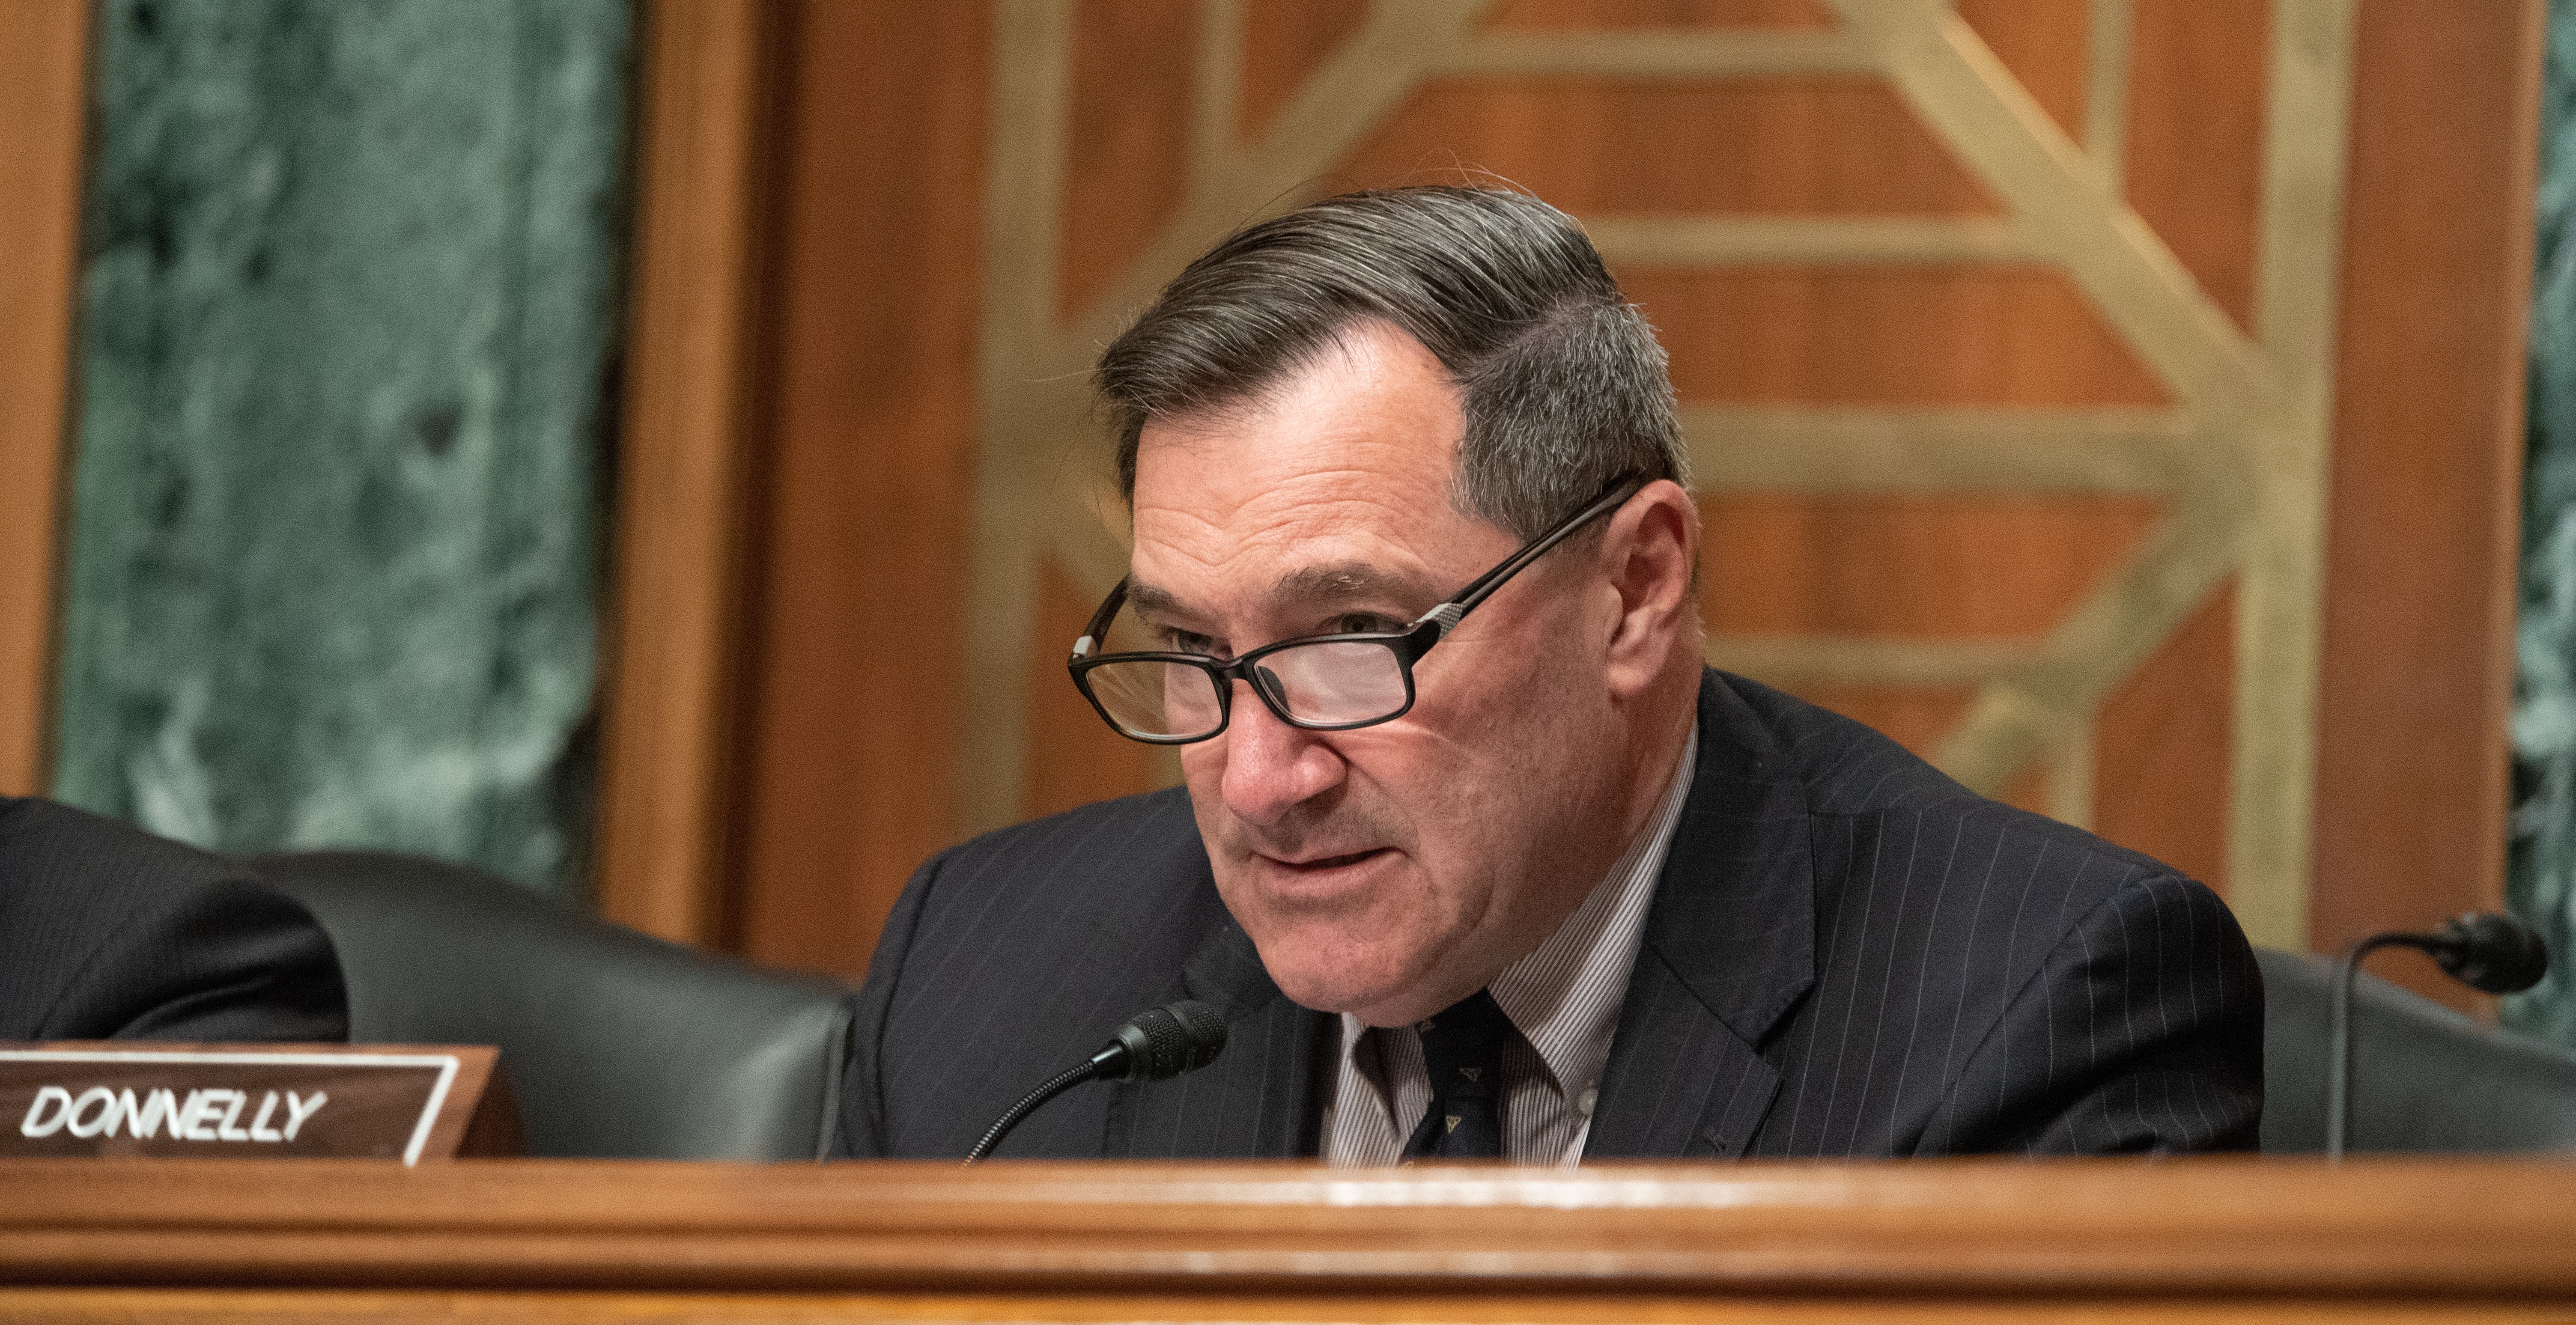 President Trump Signs Donnelly’s “Very Important” Bipartisan Regulatory Relief Package into Law